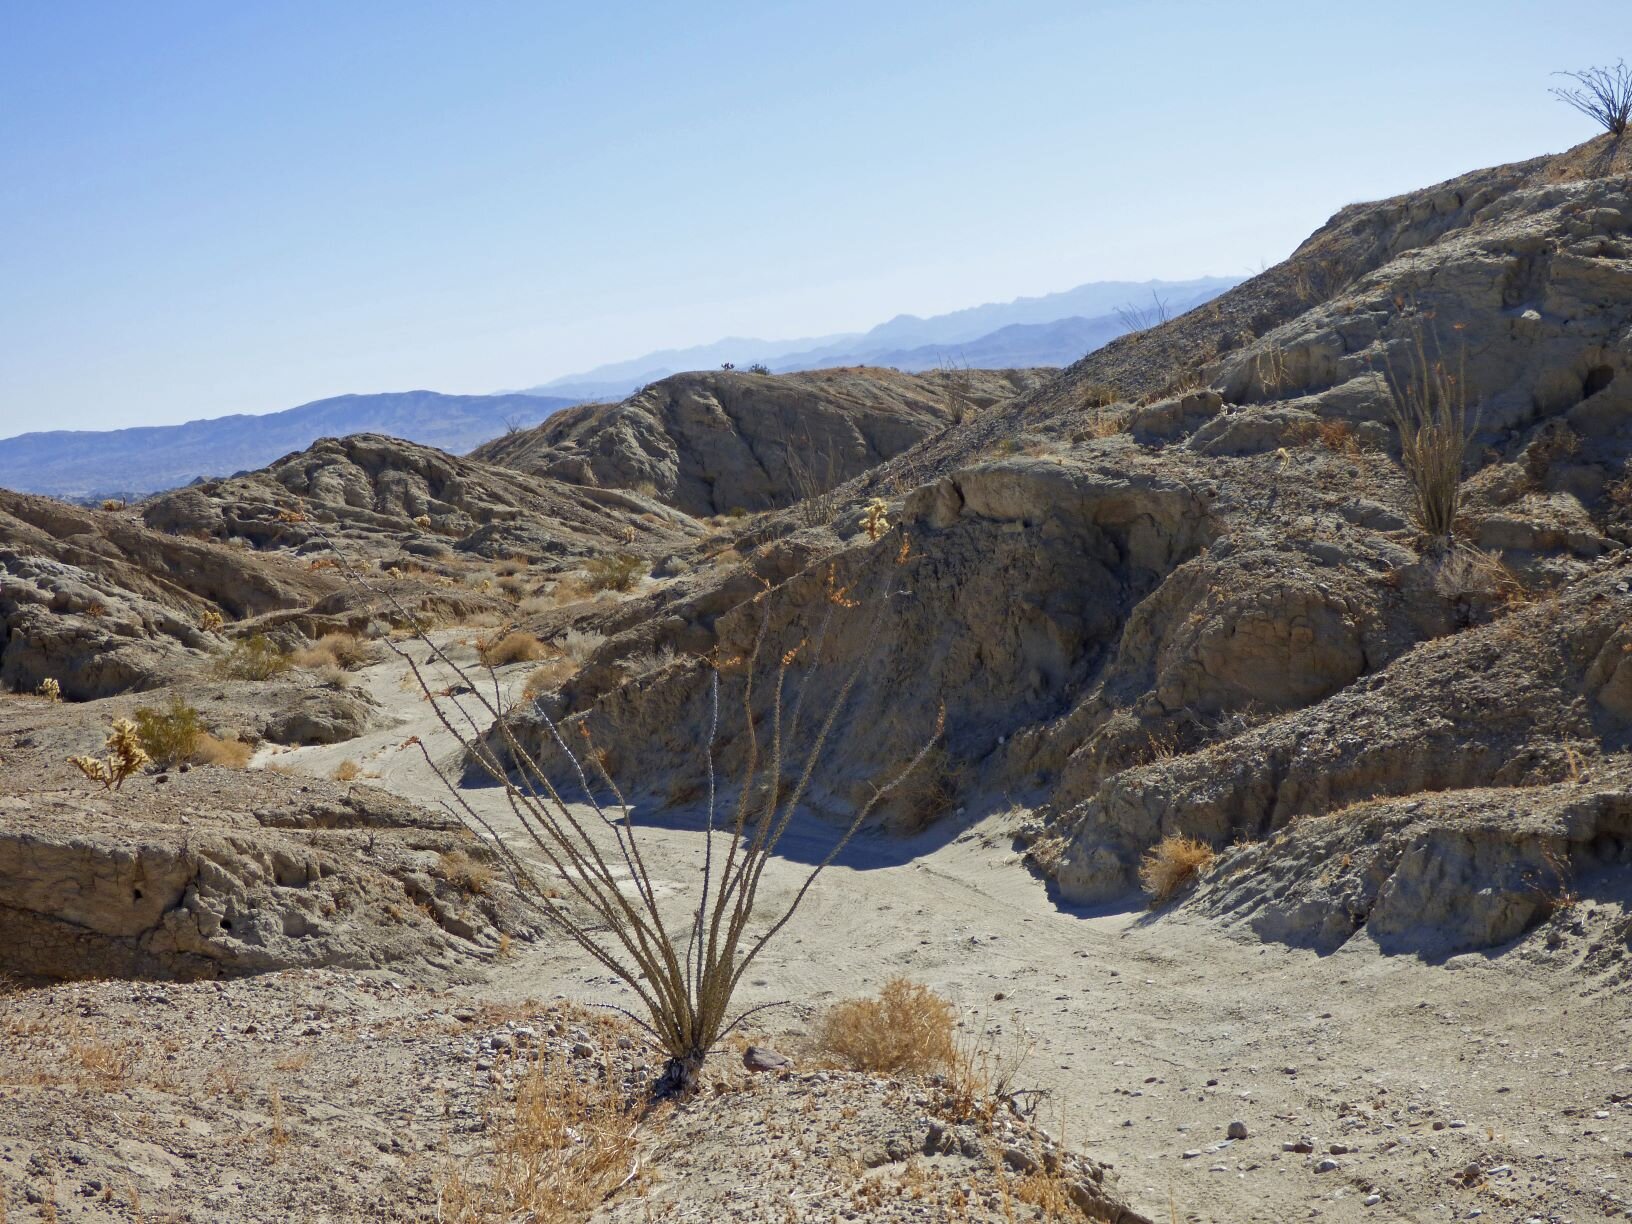  From the Carrizo Valley, we took a walk through the View of the Badlands Wash